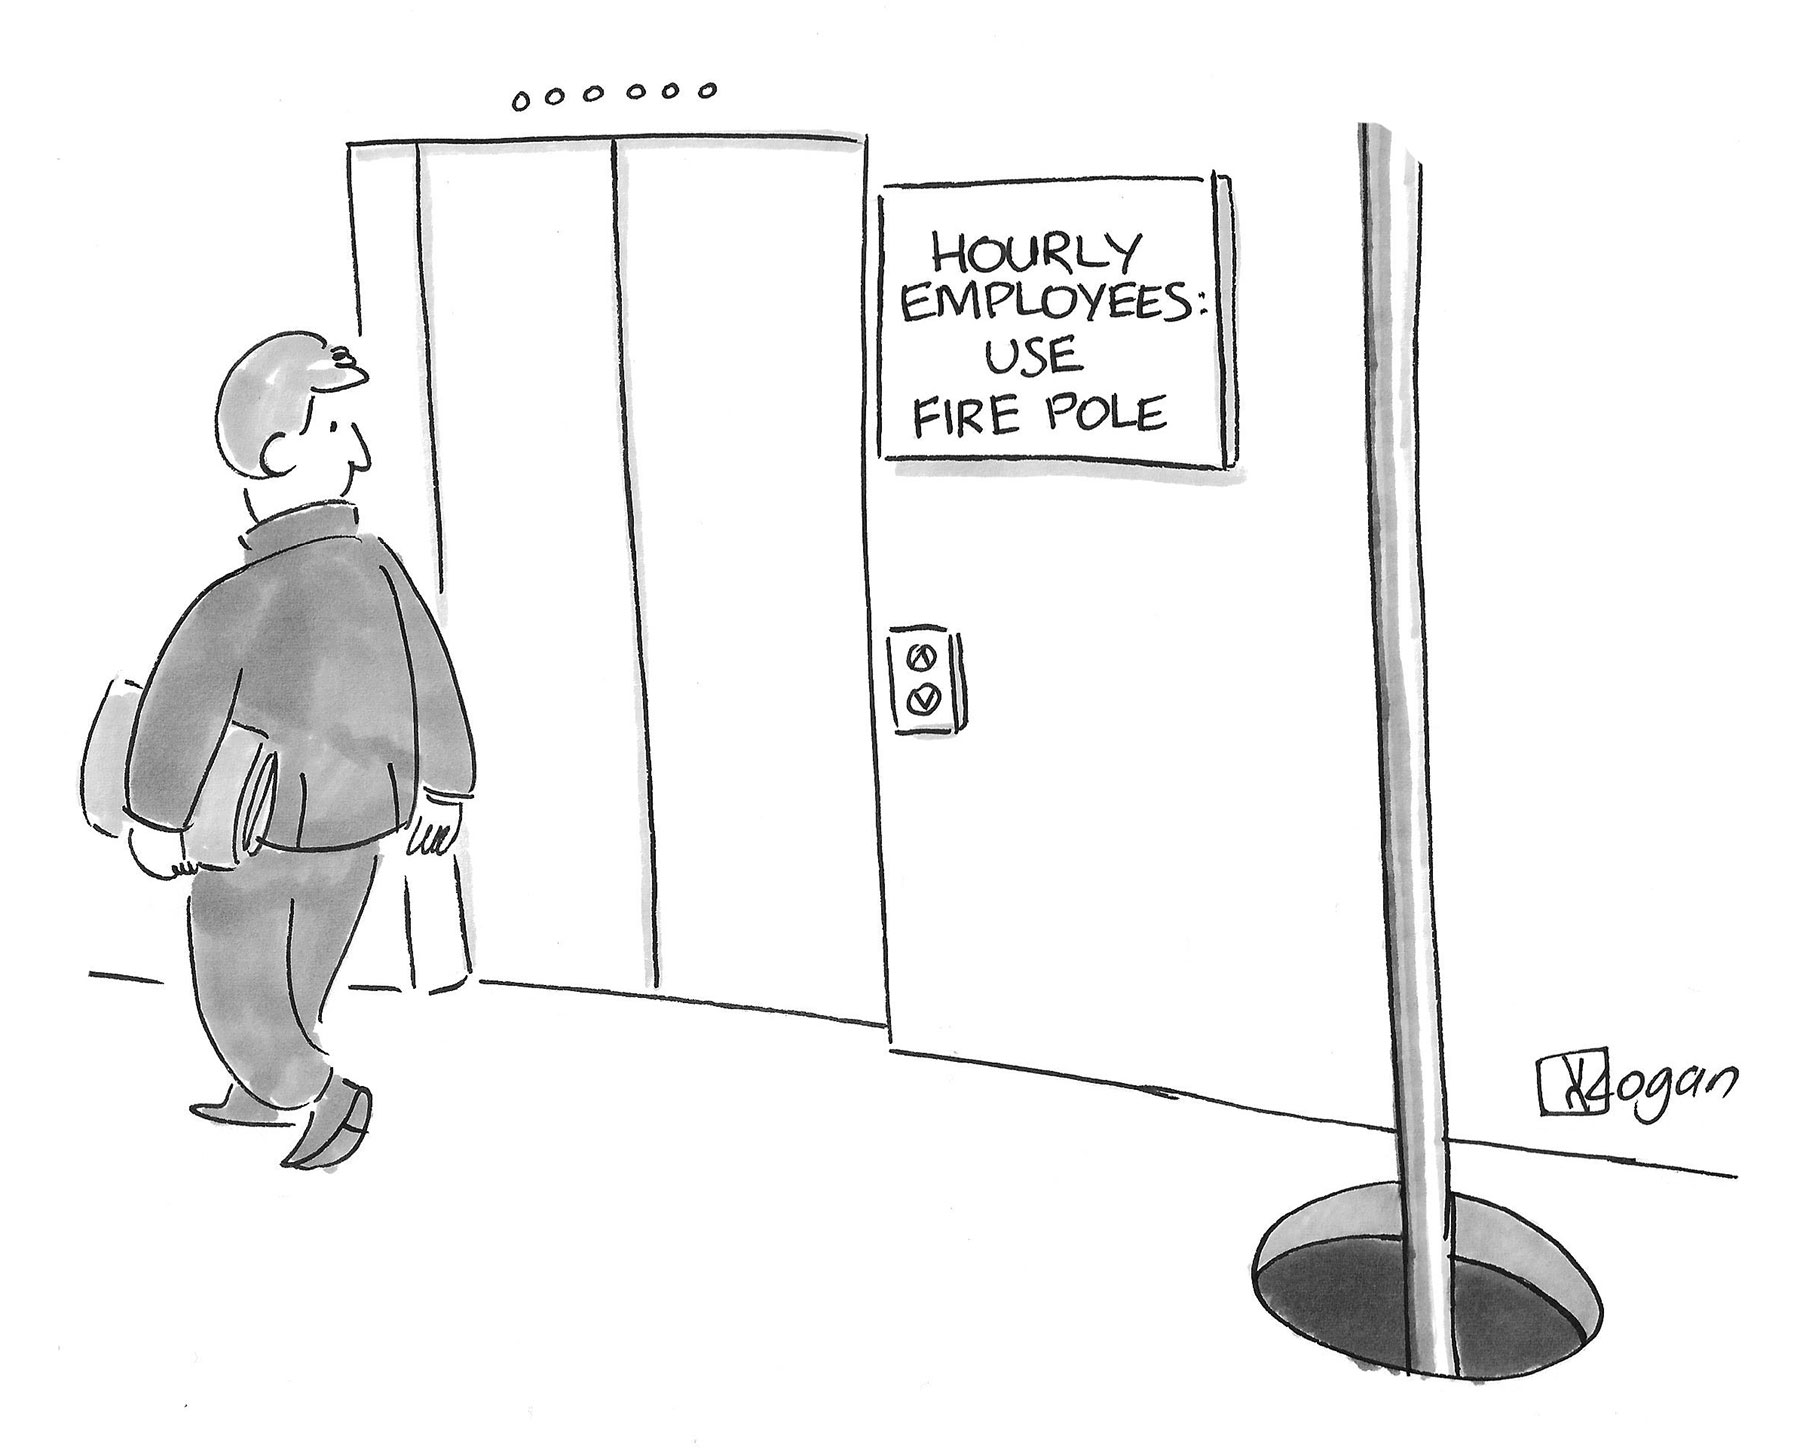 (A sign by the office elevator reads: 'Hourly Employees: Use Fire Pole.')